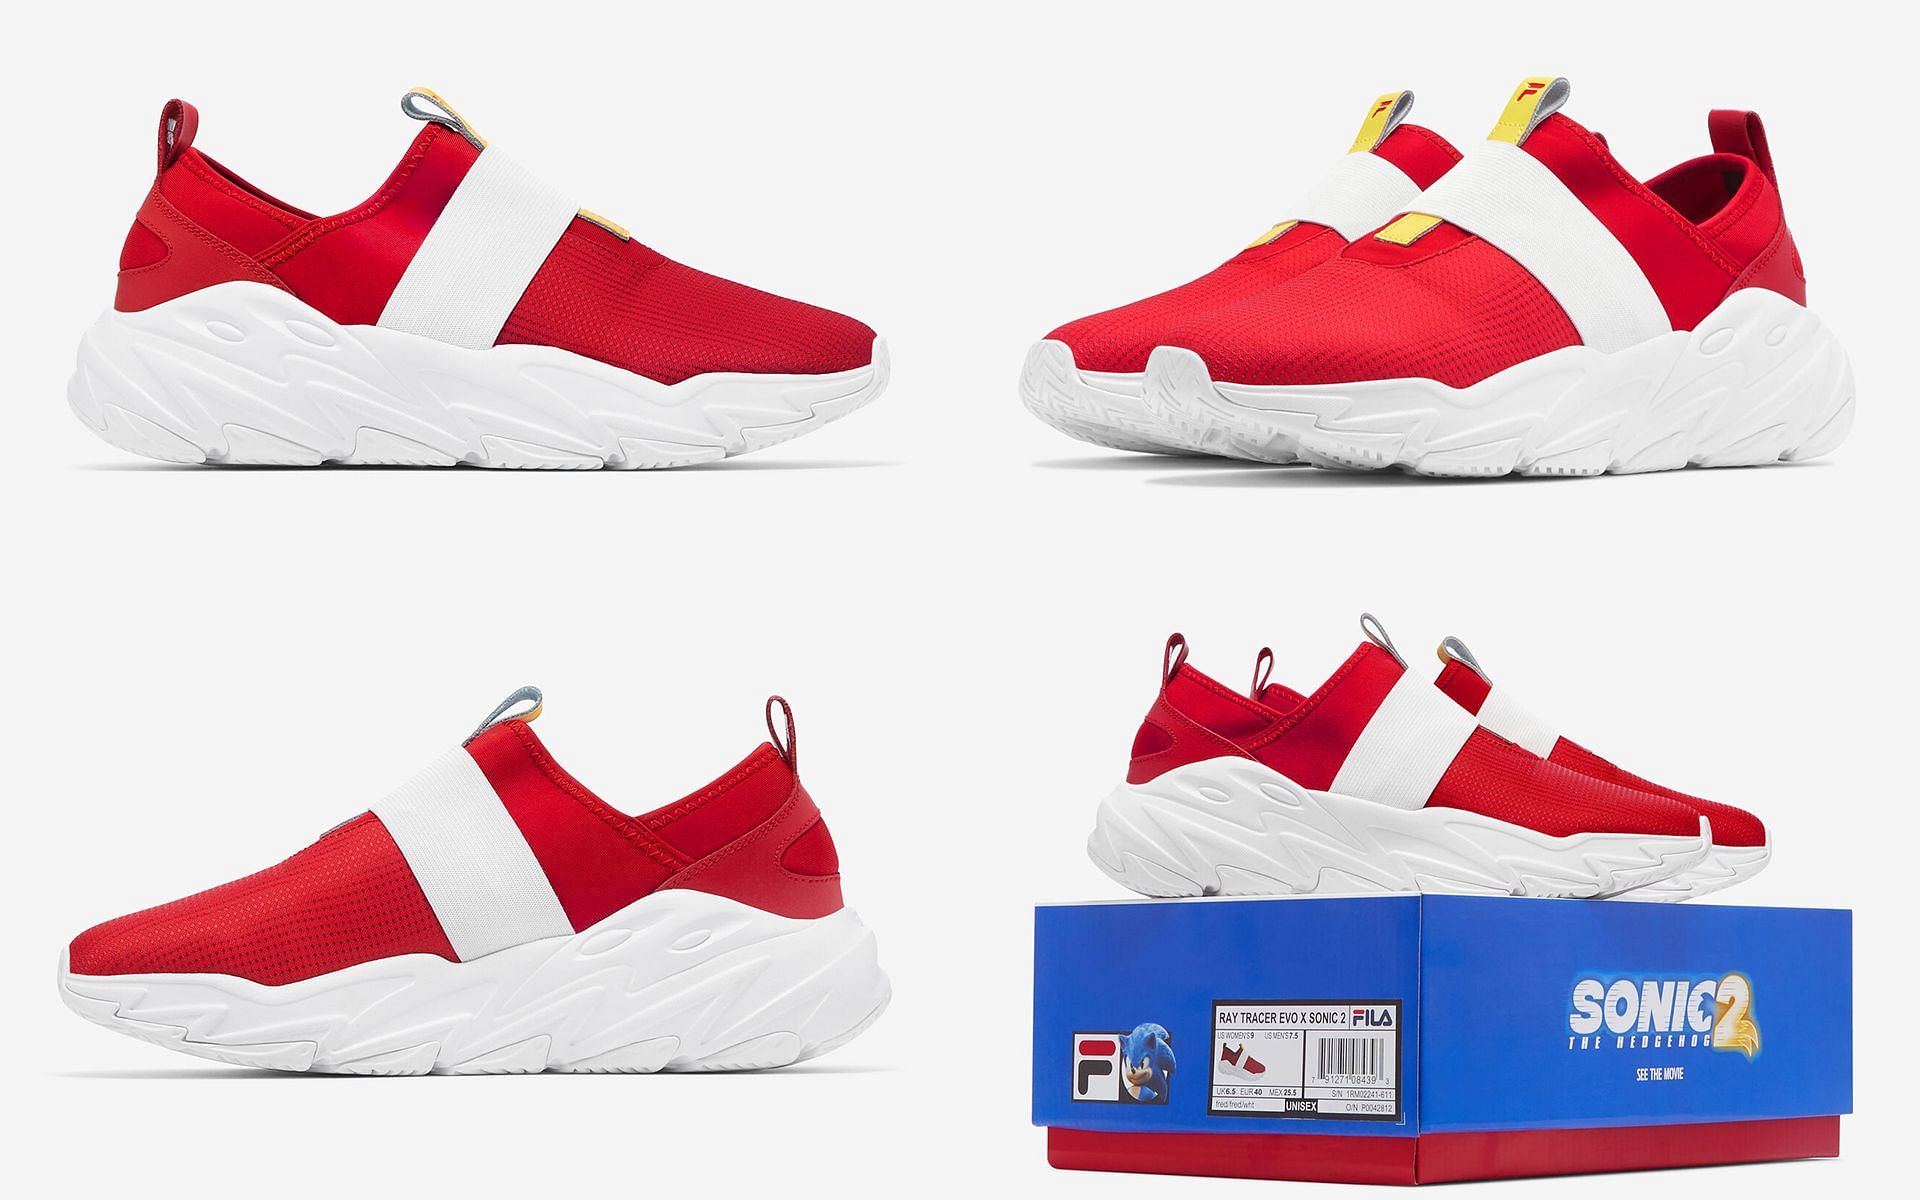 Where to buy Fila x Sonic the Hedgehog 2 sneakers? Price, release date, and  more